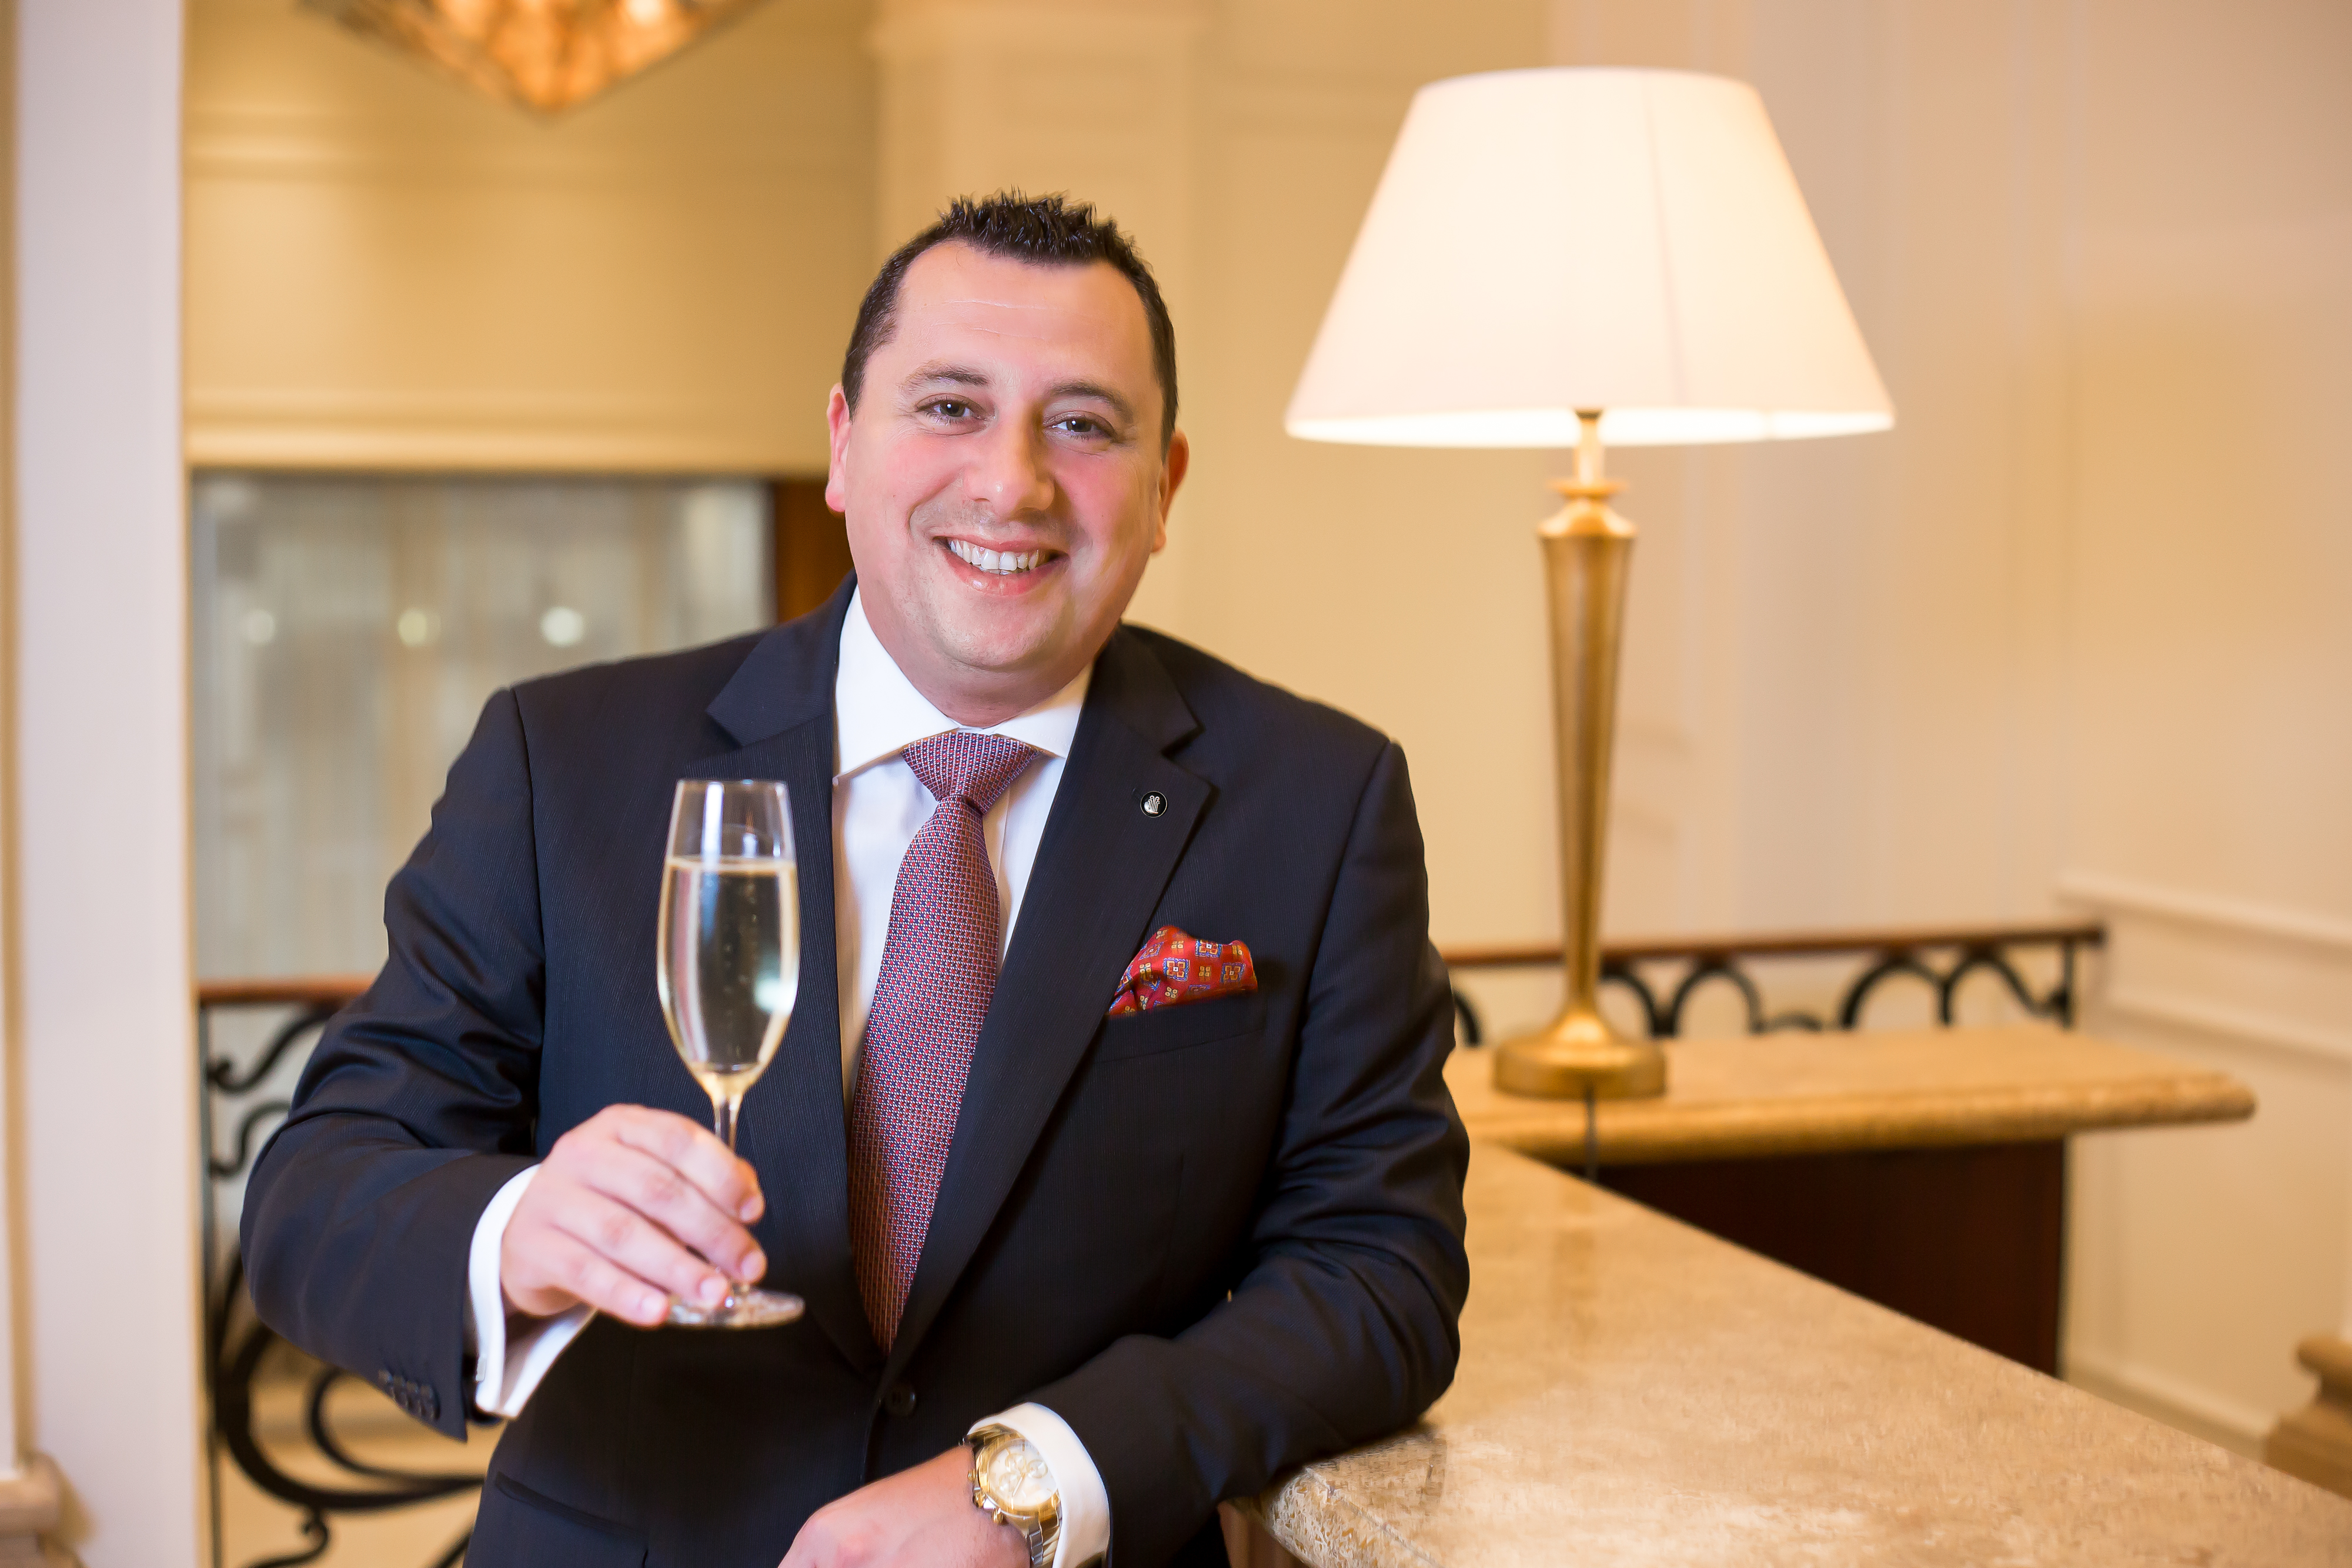 Xpat Interview 2: Jean Pierre Mifsud, Former General Manager, Corinthia Hotel Budapest